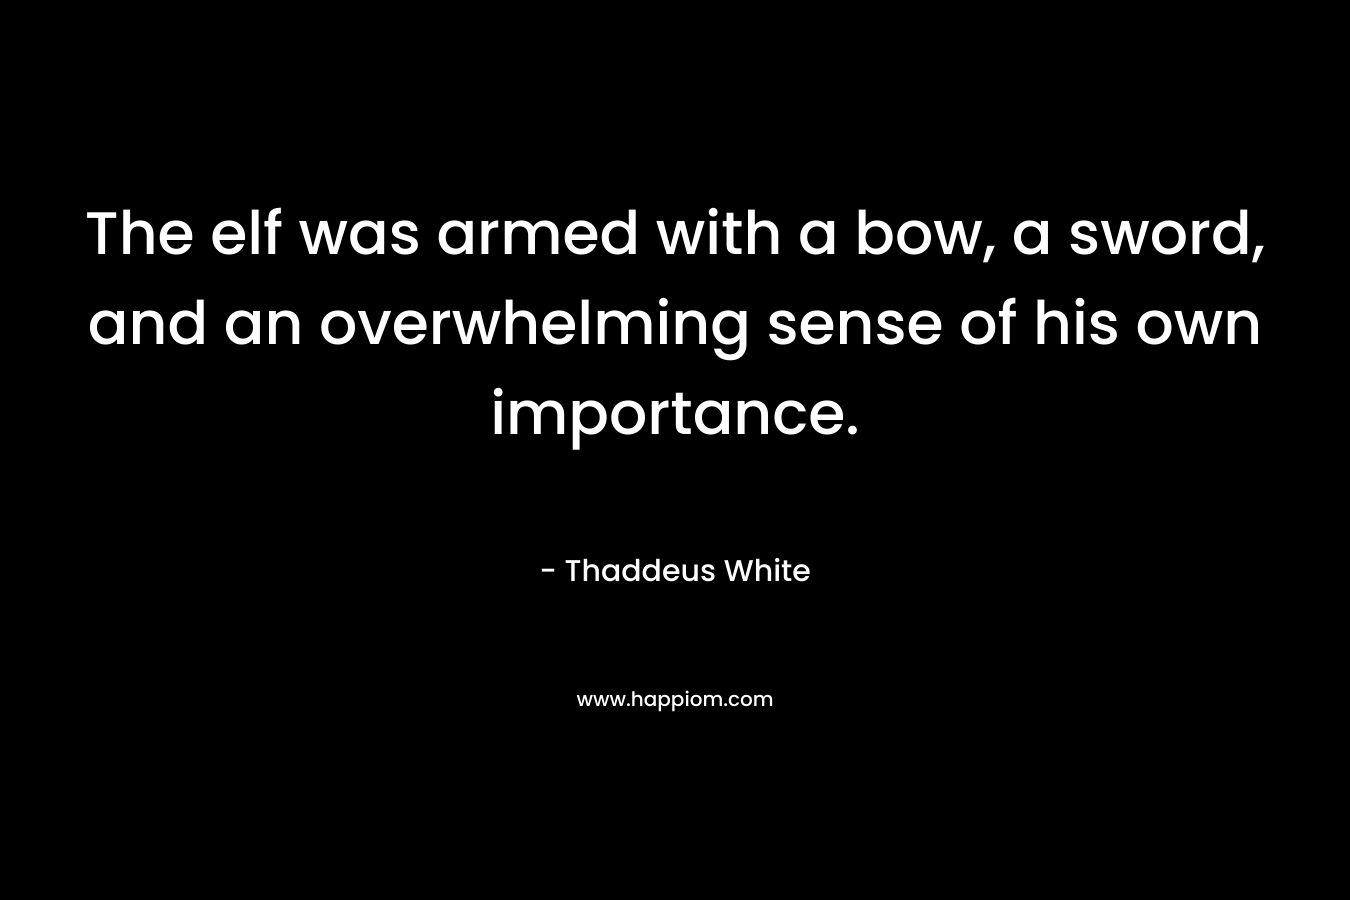 The elf was armed with a bow, a sword, and an overwhelming sense of his own importance. – Thaddeus White